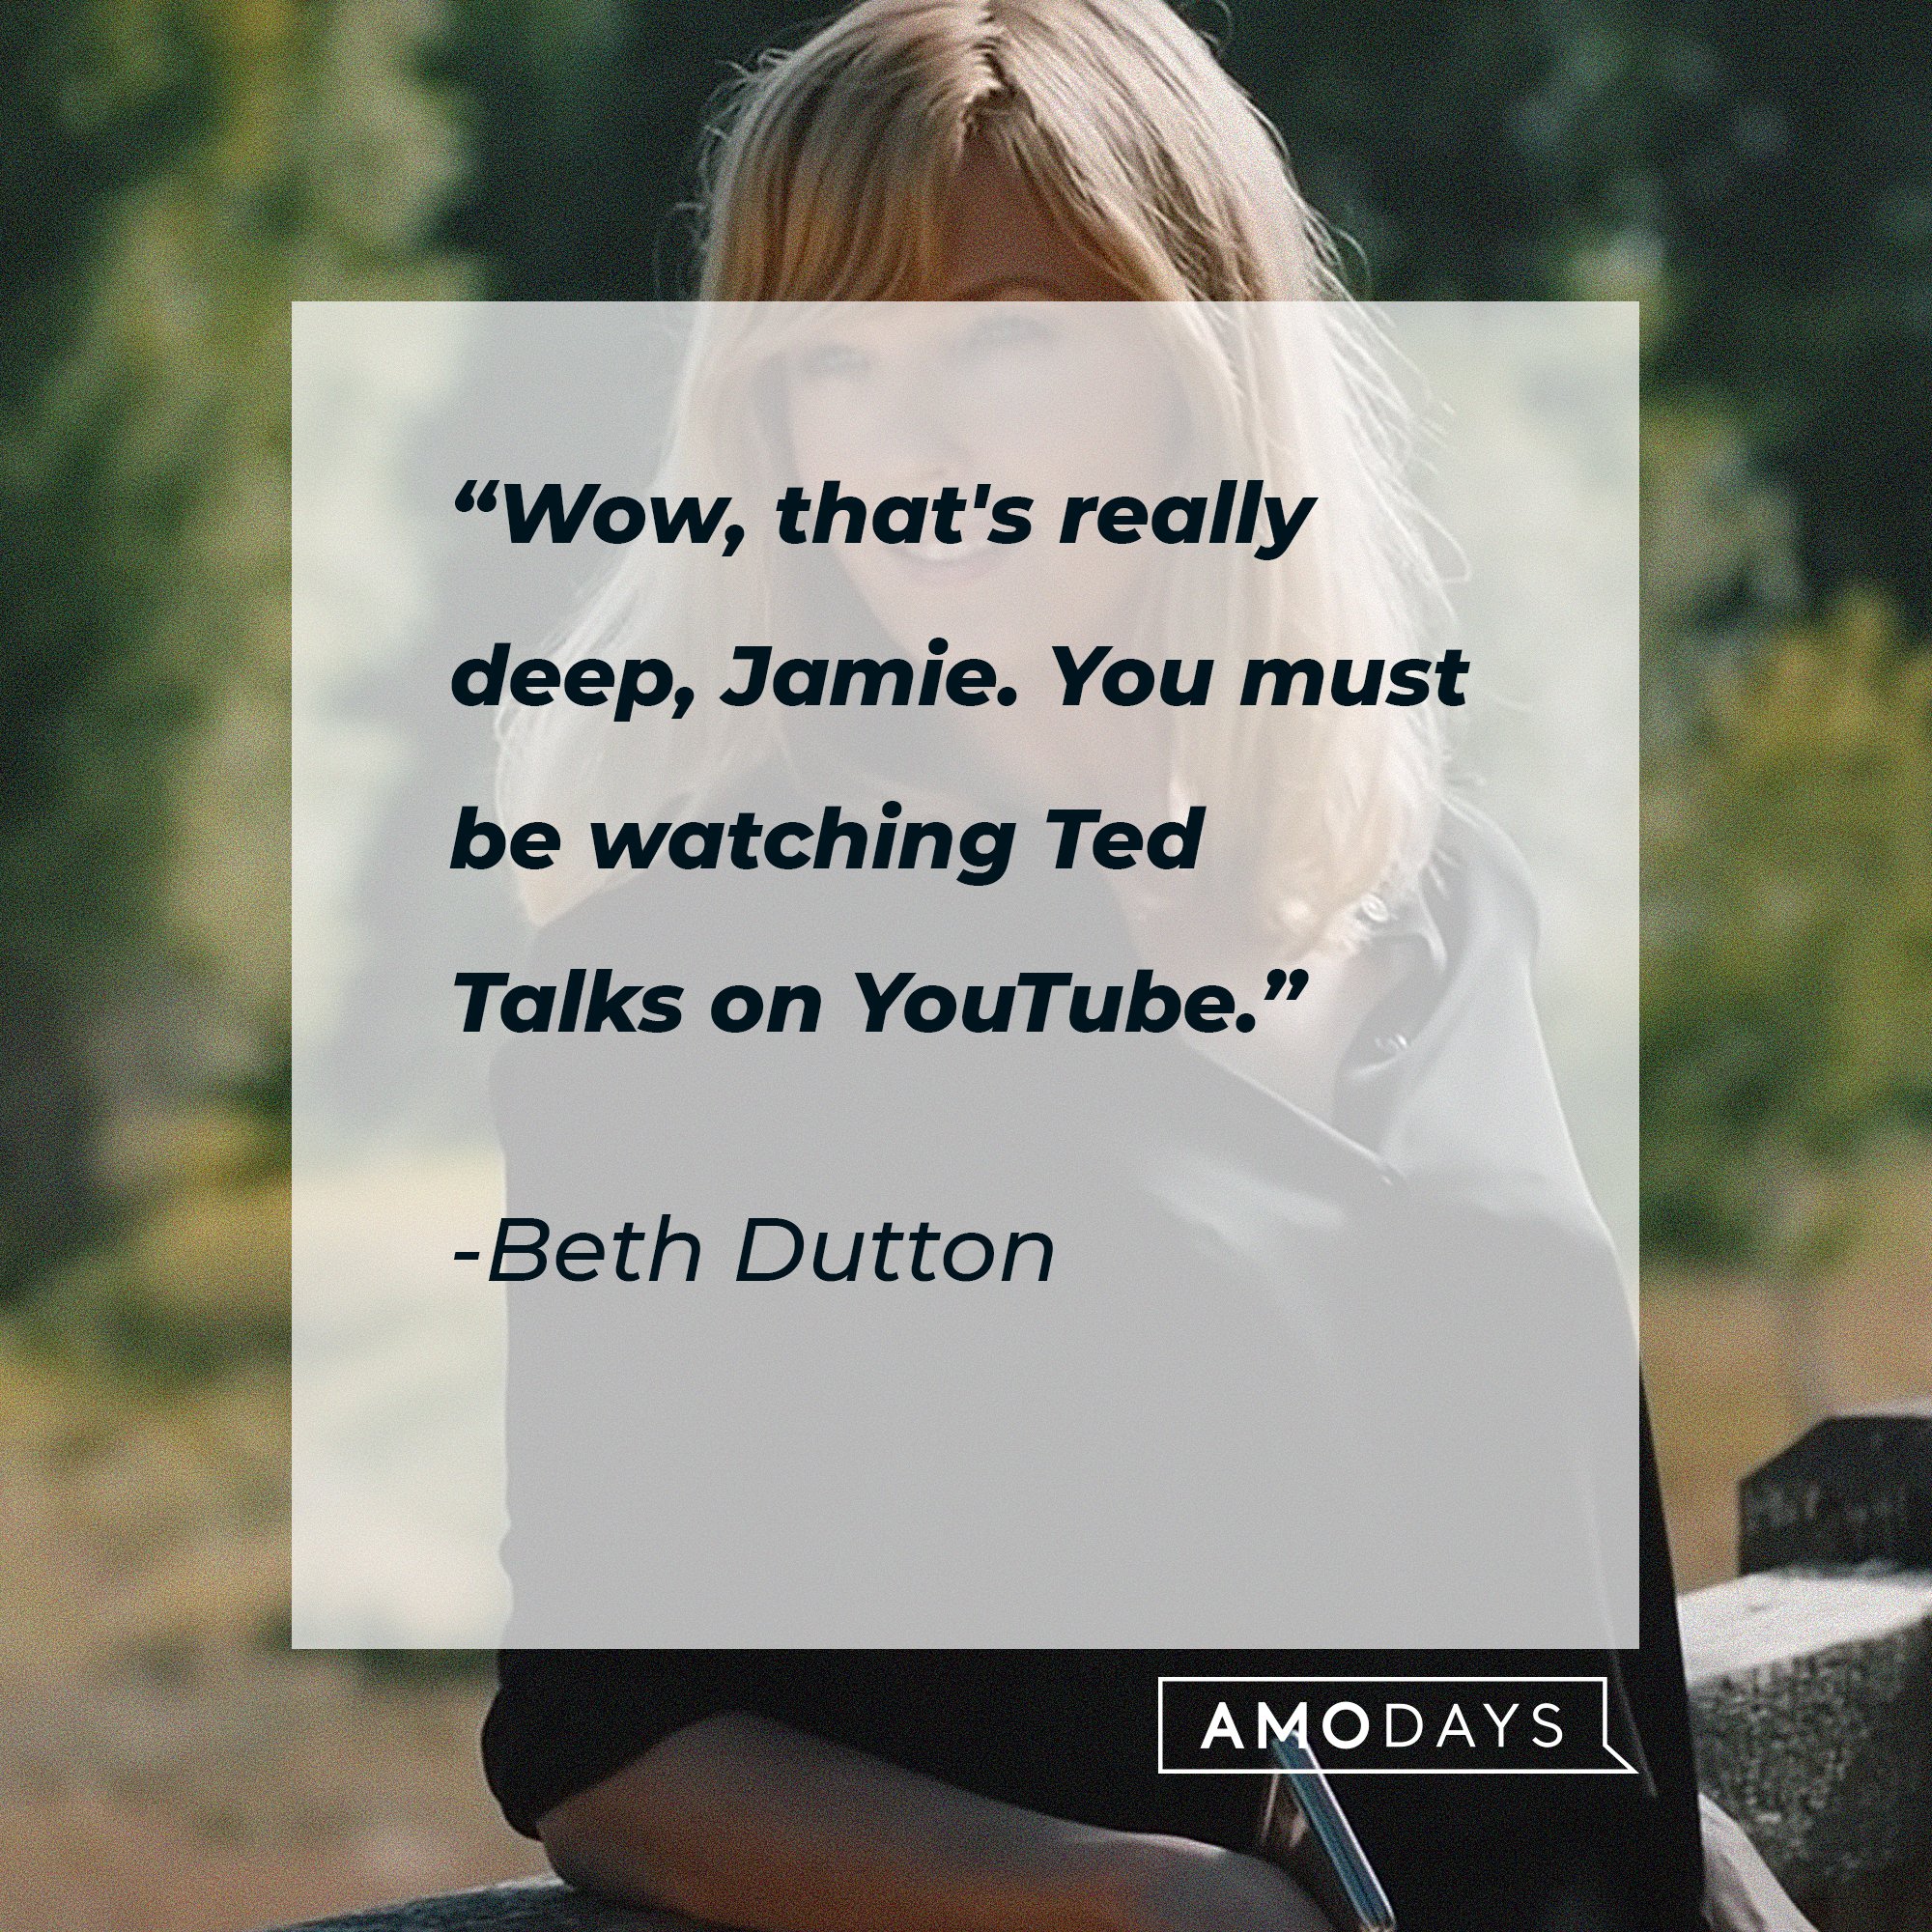  Beth Dutton's quote: "Wow, that's really deep, Jamie. You must be watching Ted Talks on YouTube."  |  Source: AmoDays